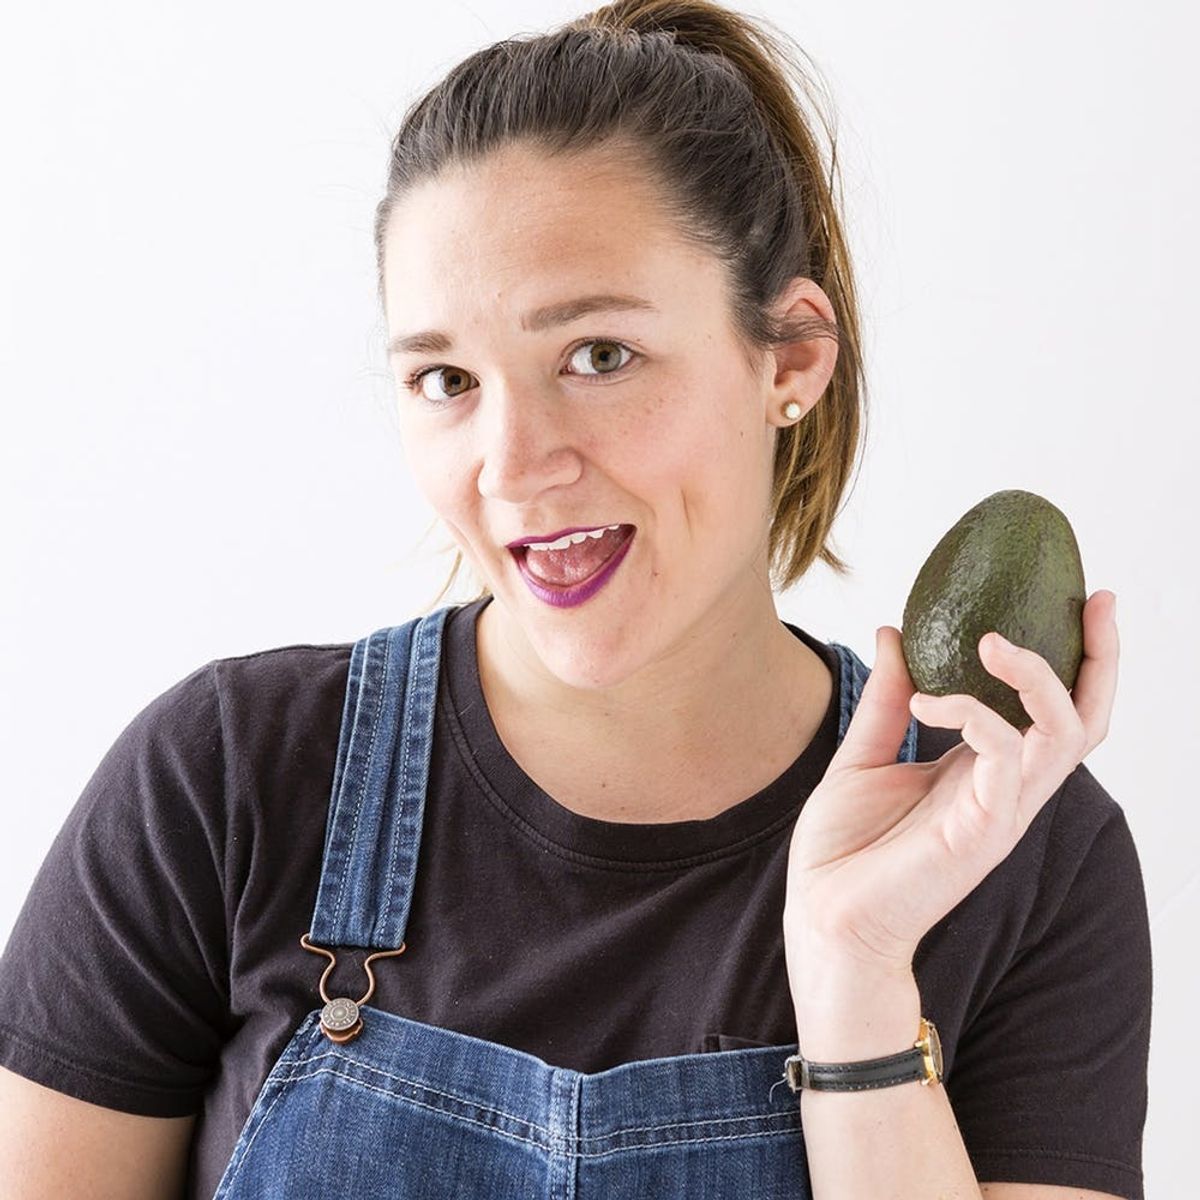 Does That 10 Minute Avocado Ripening Hack Really Work? We Tried It!